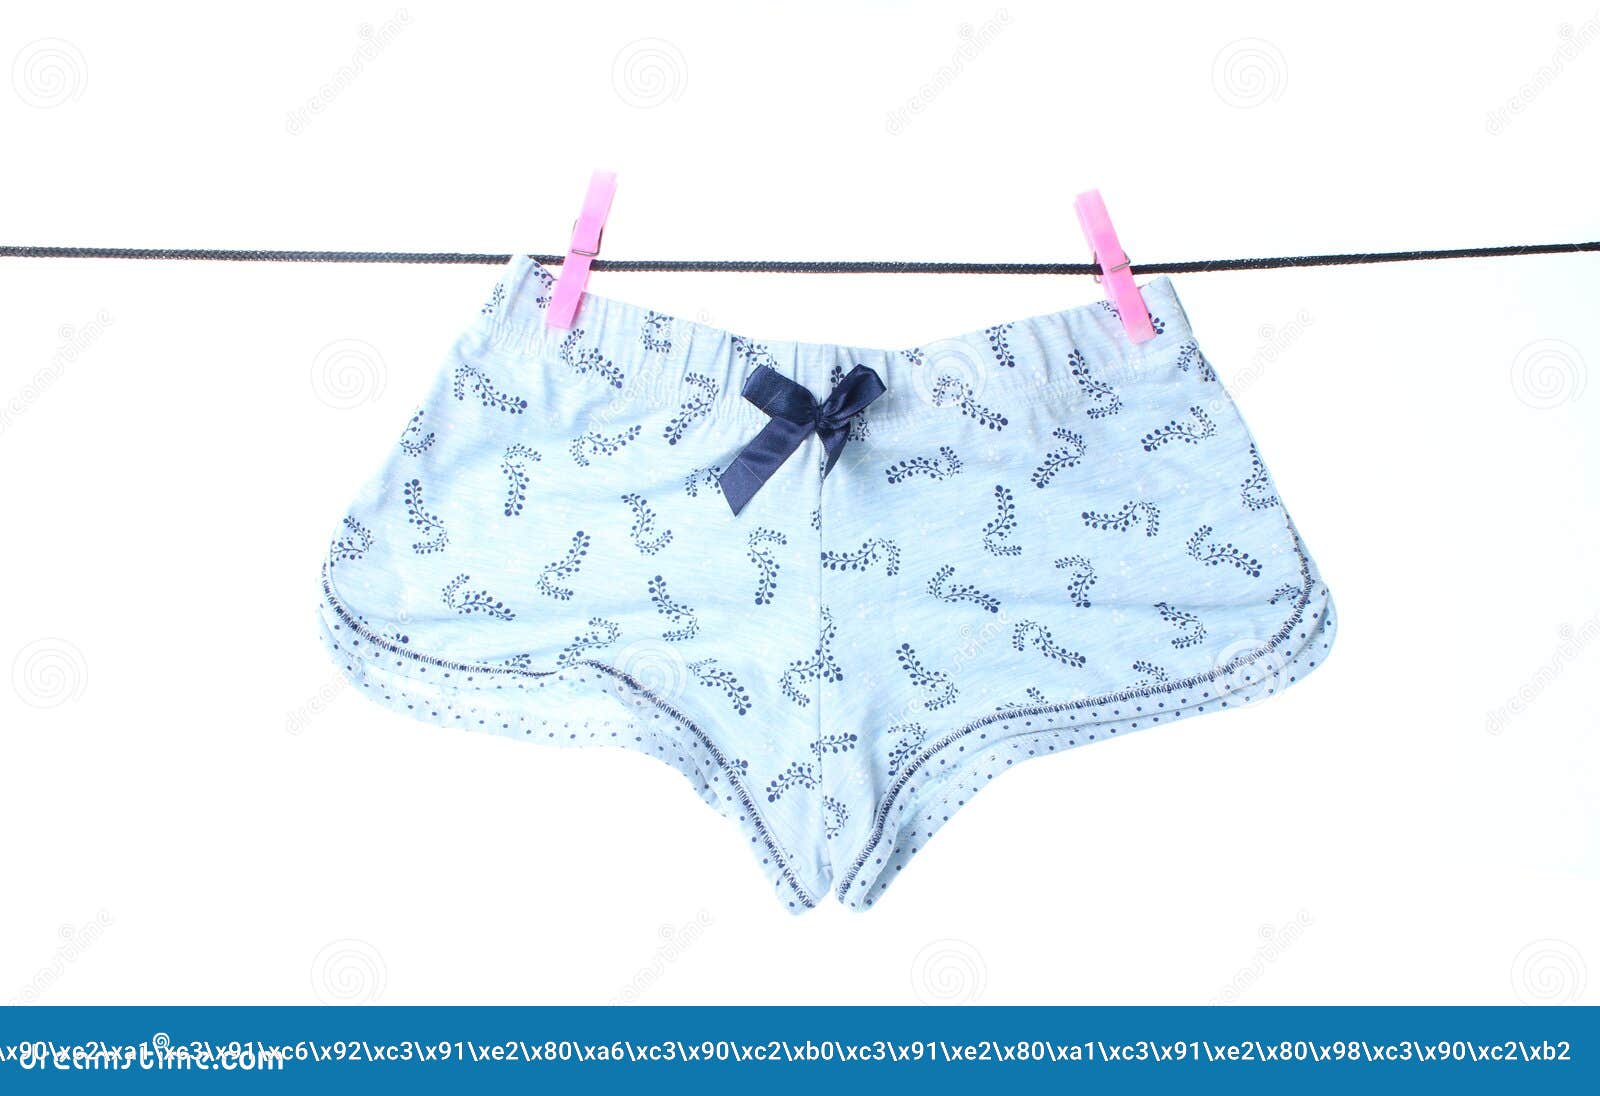 1,529 Panties Hanging On Line Images, Stock Photos, 3D objects